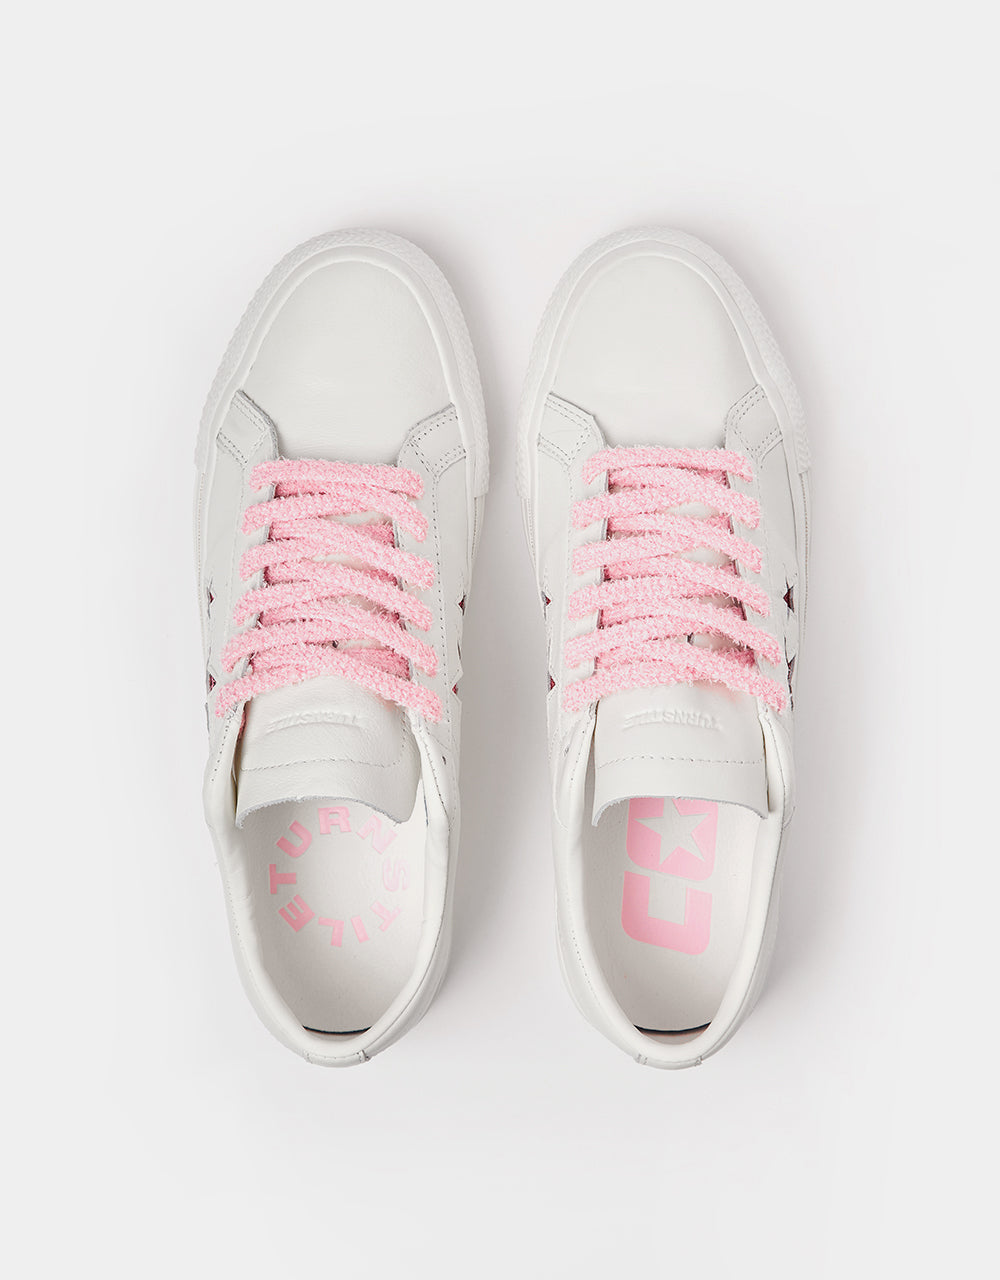 Converse x Turnstile One Star Pro Skate Shoes - White/Pink/White